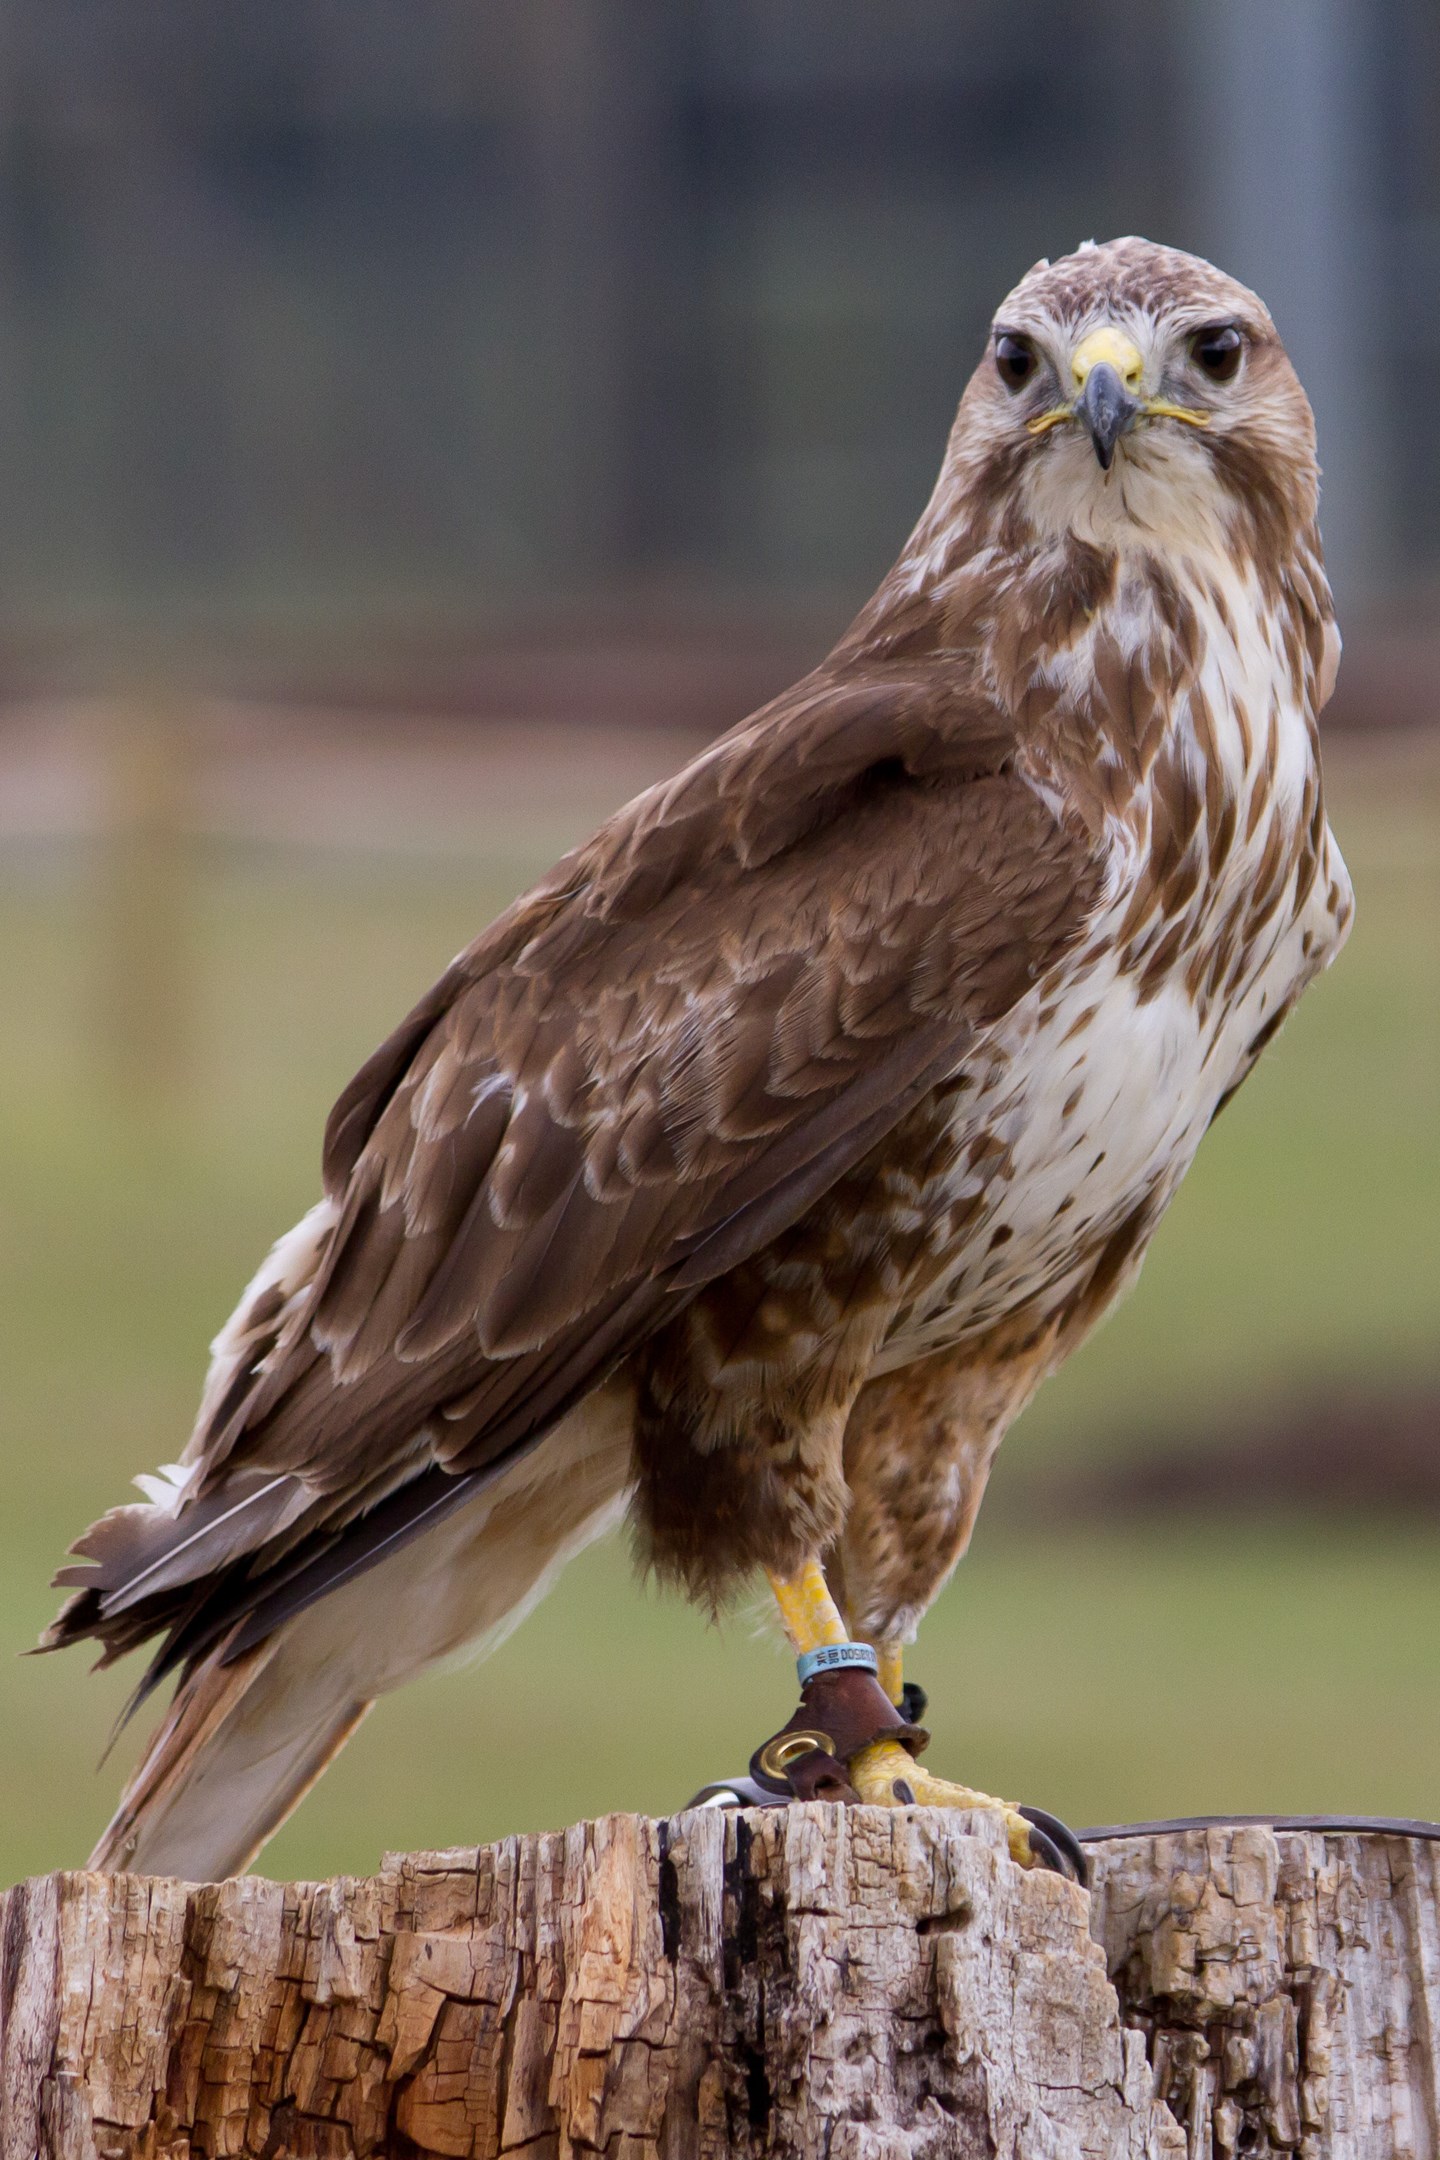 All about Birds of Prey